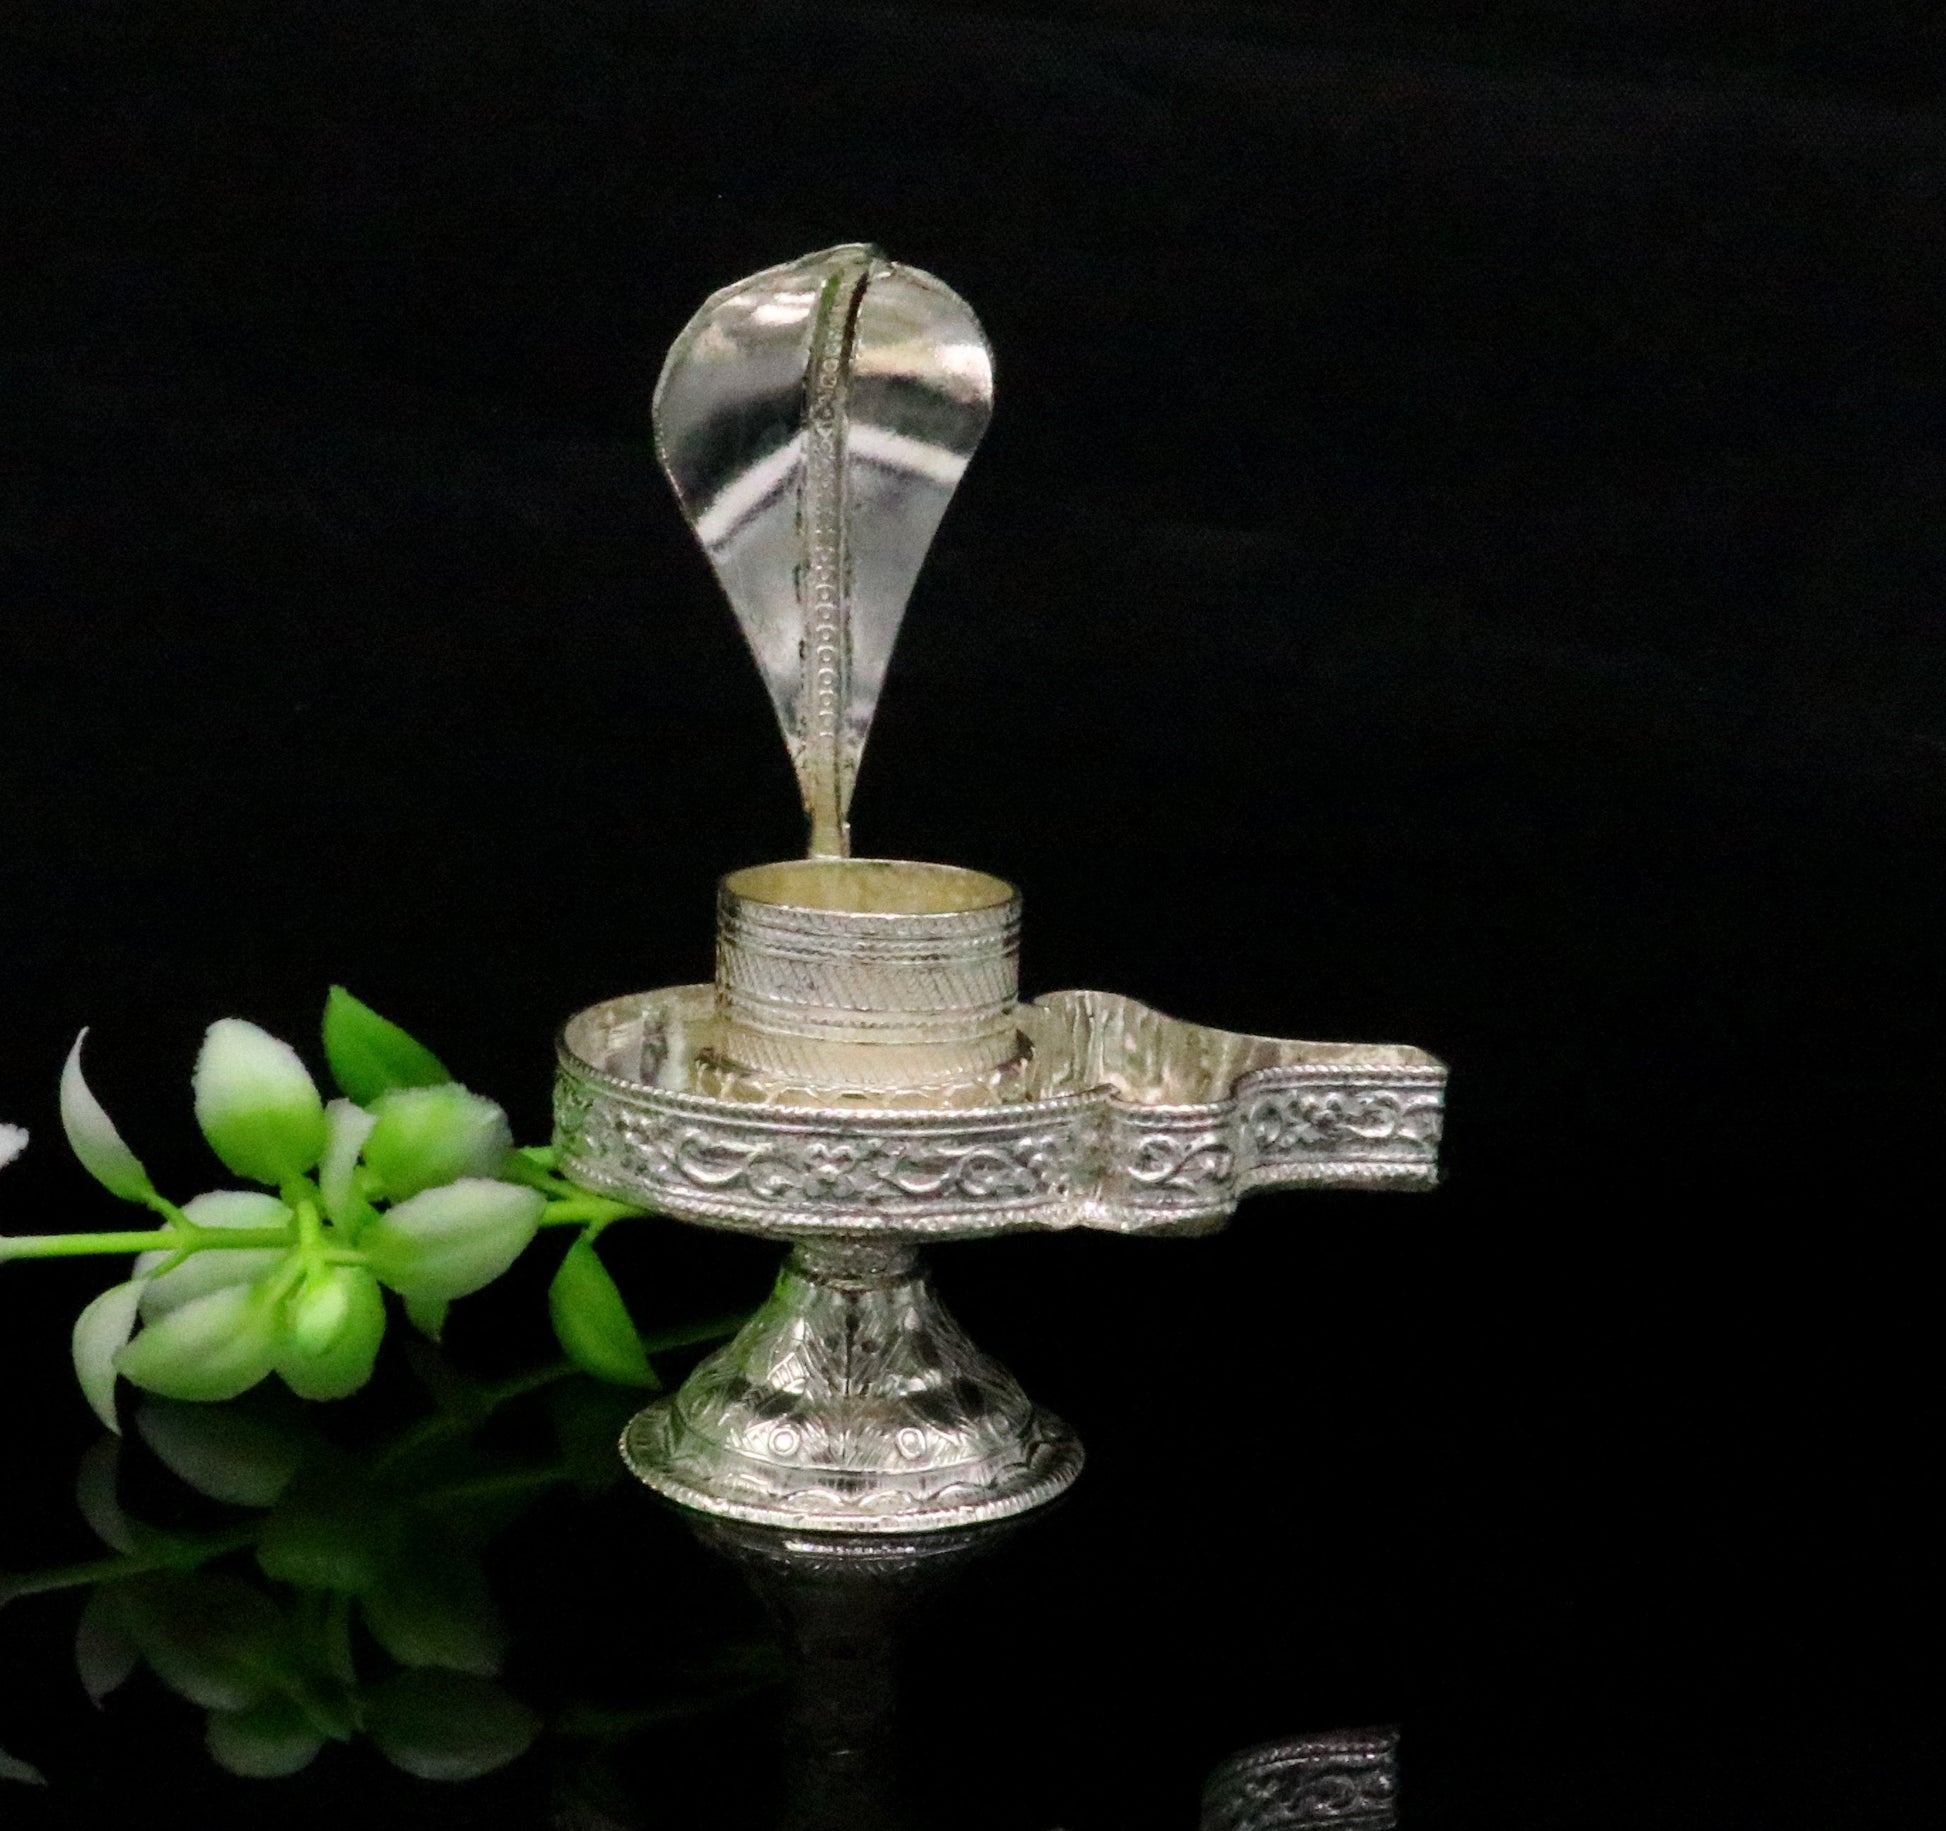 925 fine solid sterling silver lord shiva lingam stand/jalheri, use for put/hold shiva lingam in home temple, awesome handmade article su167 - TRIBAL ORNAMENTS